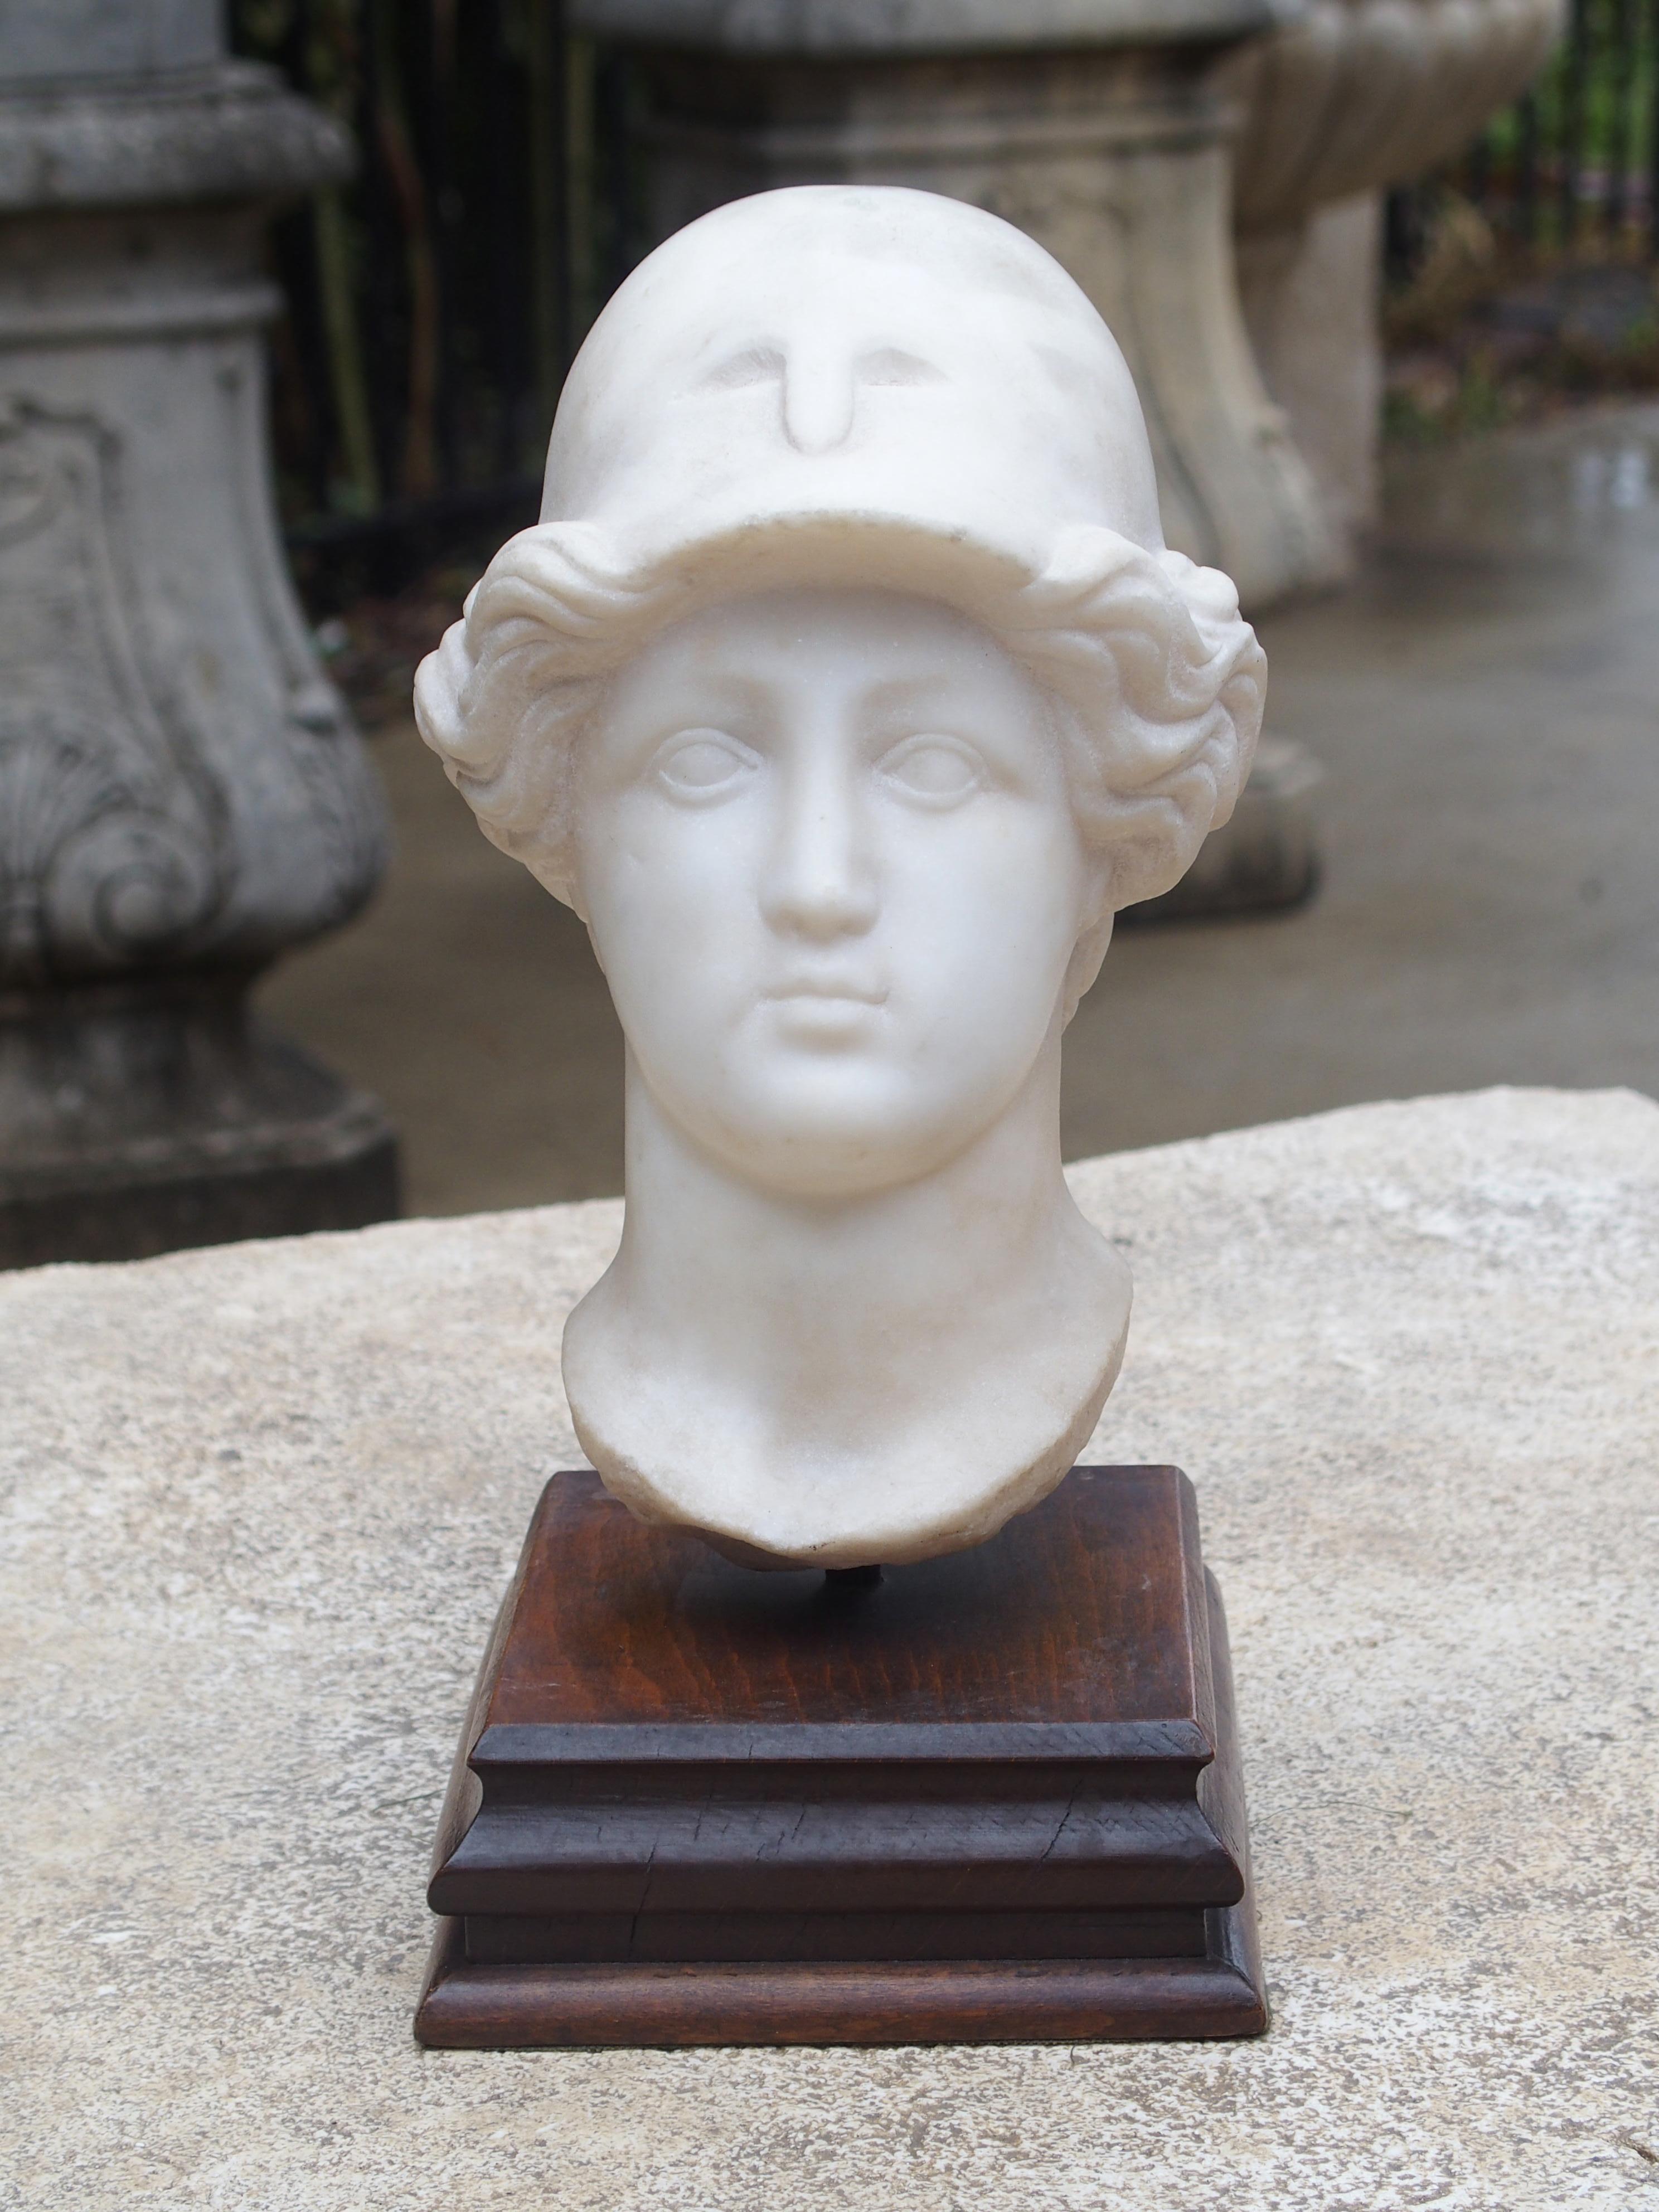 This is an antique Italian carved marble head of a young man in a Greco/Roman helmet on a wooden base. The sculptor has adeptly portrayed his countenance as wide eyed innocence. The marble head rests on the wooden base by means of a small iron rod